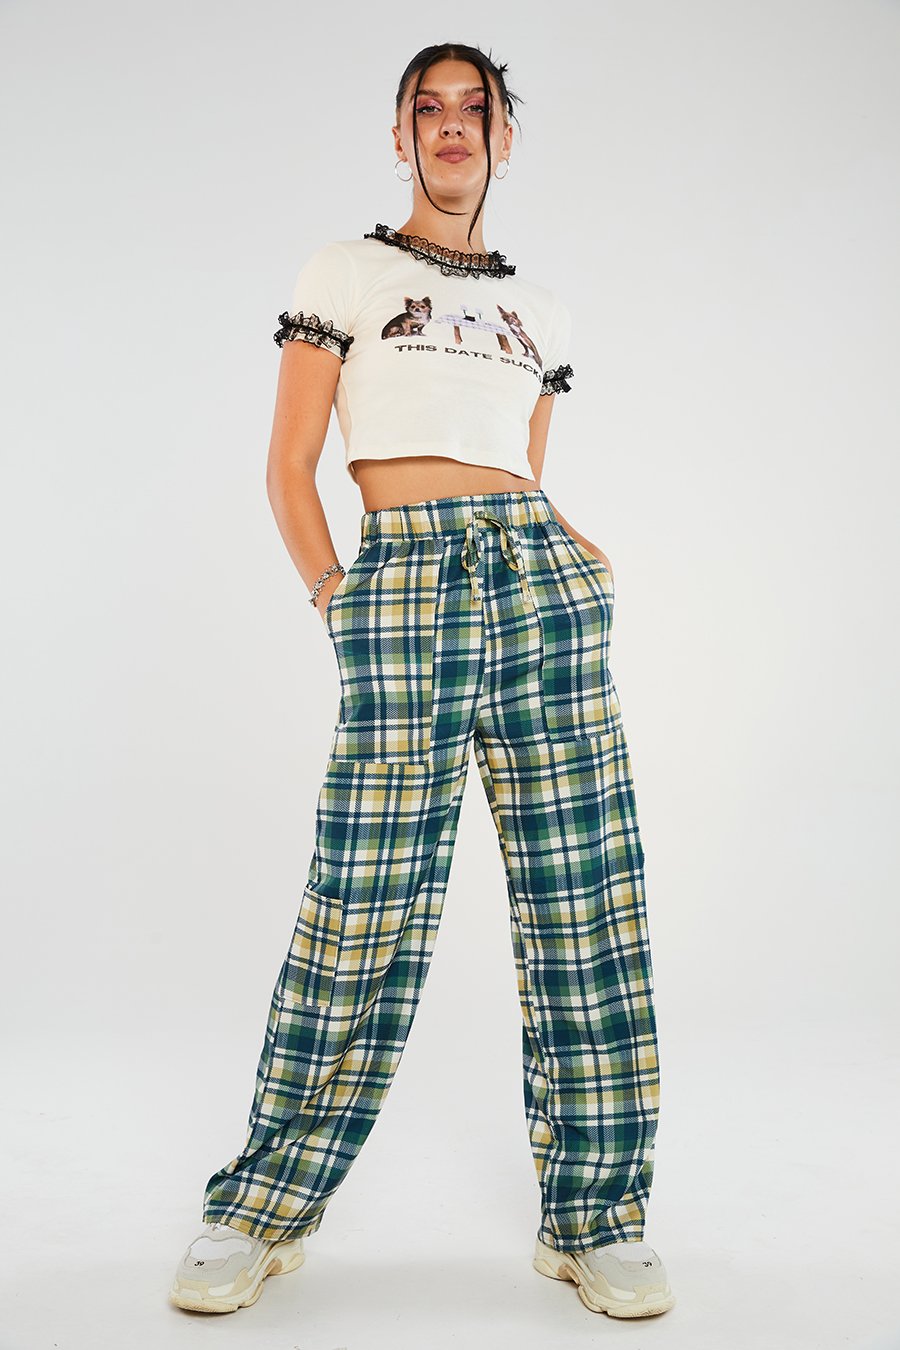 CHECKERED WL 90'S PANT - EXCLUSIVE Pants from NGO - Just $27.00! SHOP NOW AT IAMINHATELOVE BOTH IN STORE FOR CYPRUS AND ONLINE WORLDWIDE